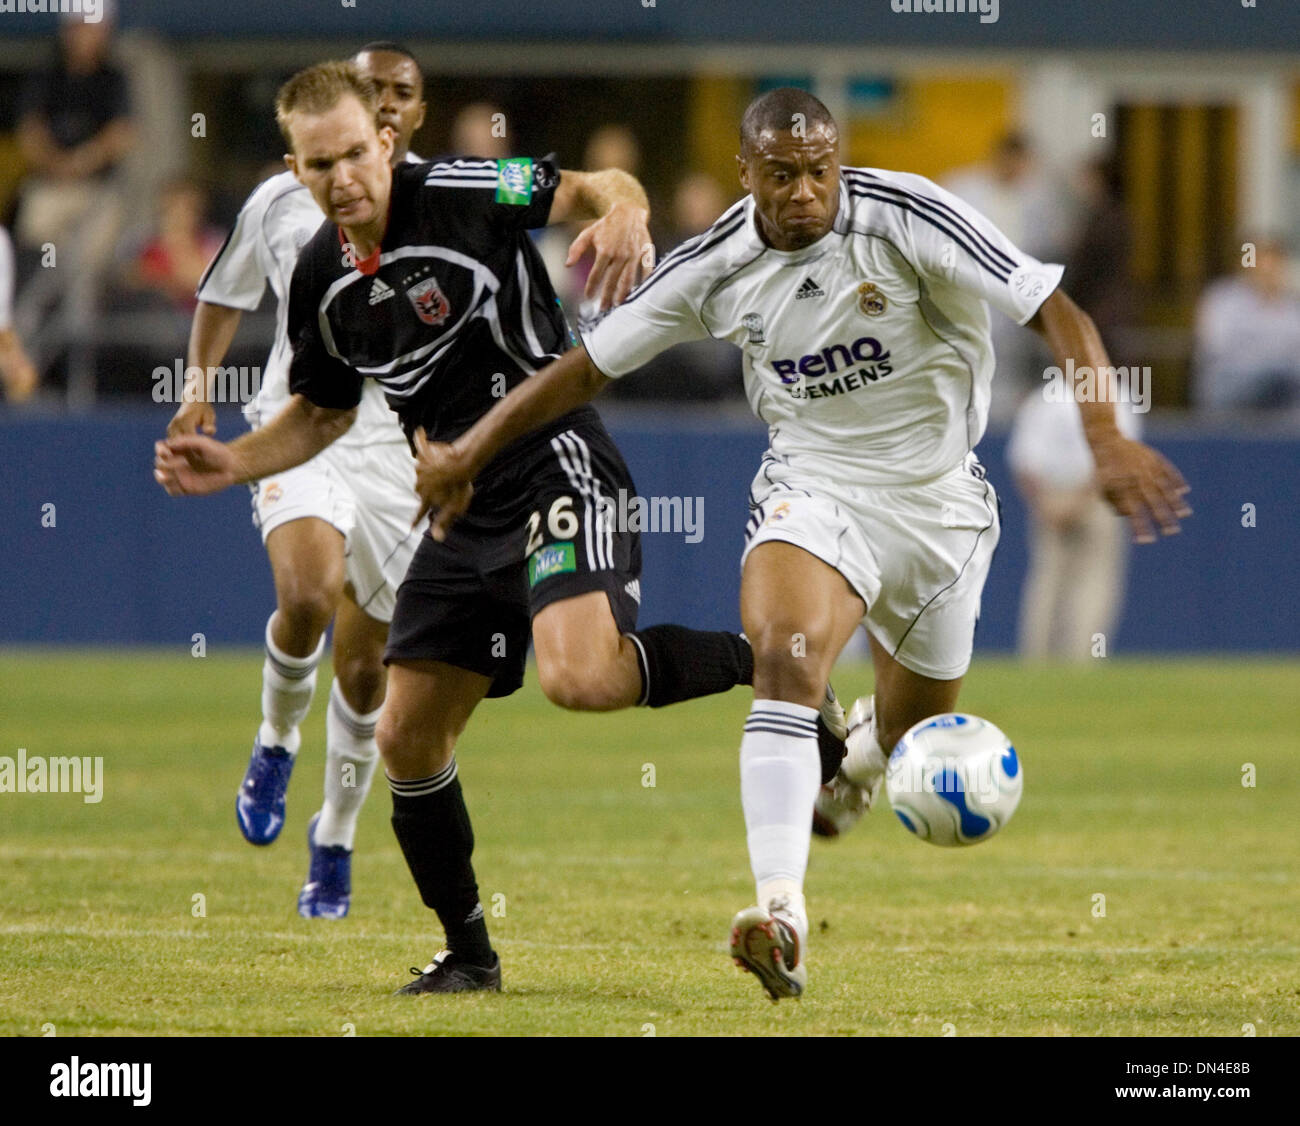 Aug 09, 2006; Seattle, WA, USA; Real Madrid's JULIO BAPTISTA (R) and D.C. United's BRYAN NAMOFF battle for the ball during first half action in their exhibition soccer match in Seattle on Wednesday. Mandatory Credit: Photo by Richard Clement/ZUMA Press. (©) Copyright 2006 by Richard Clement Stock Photo